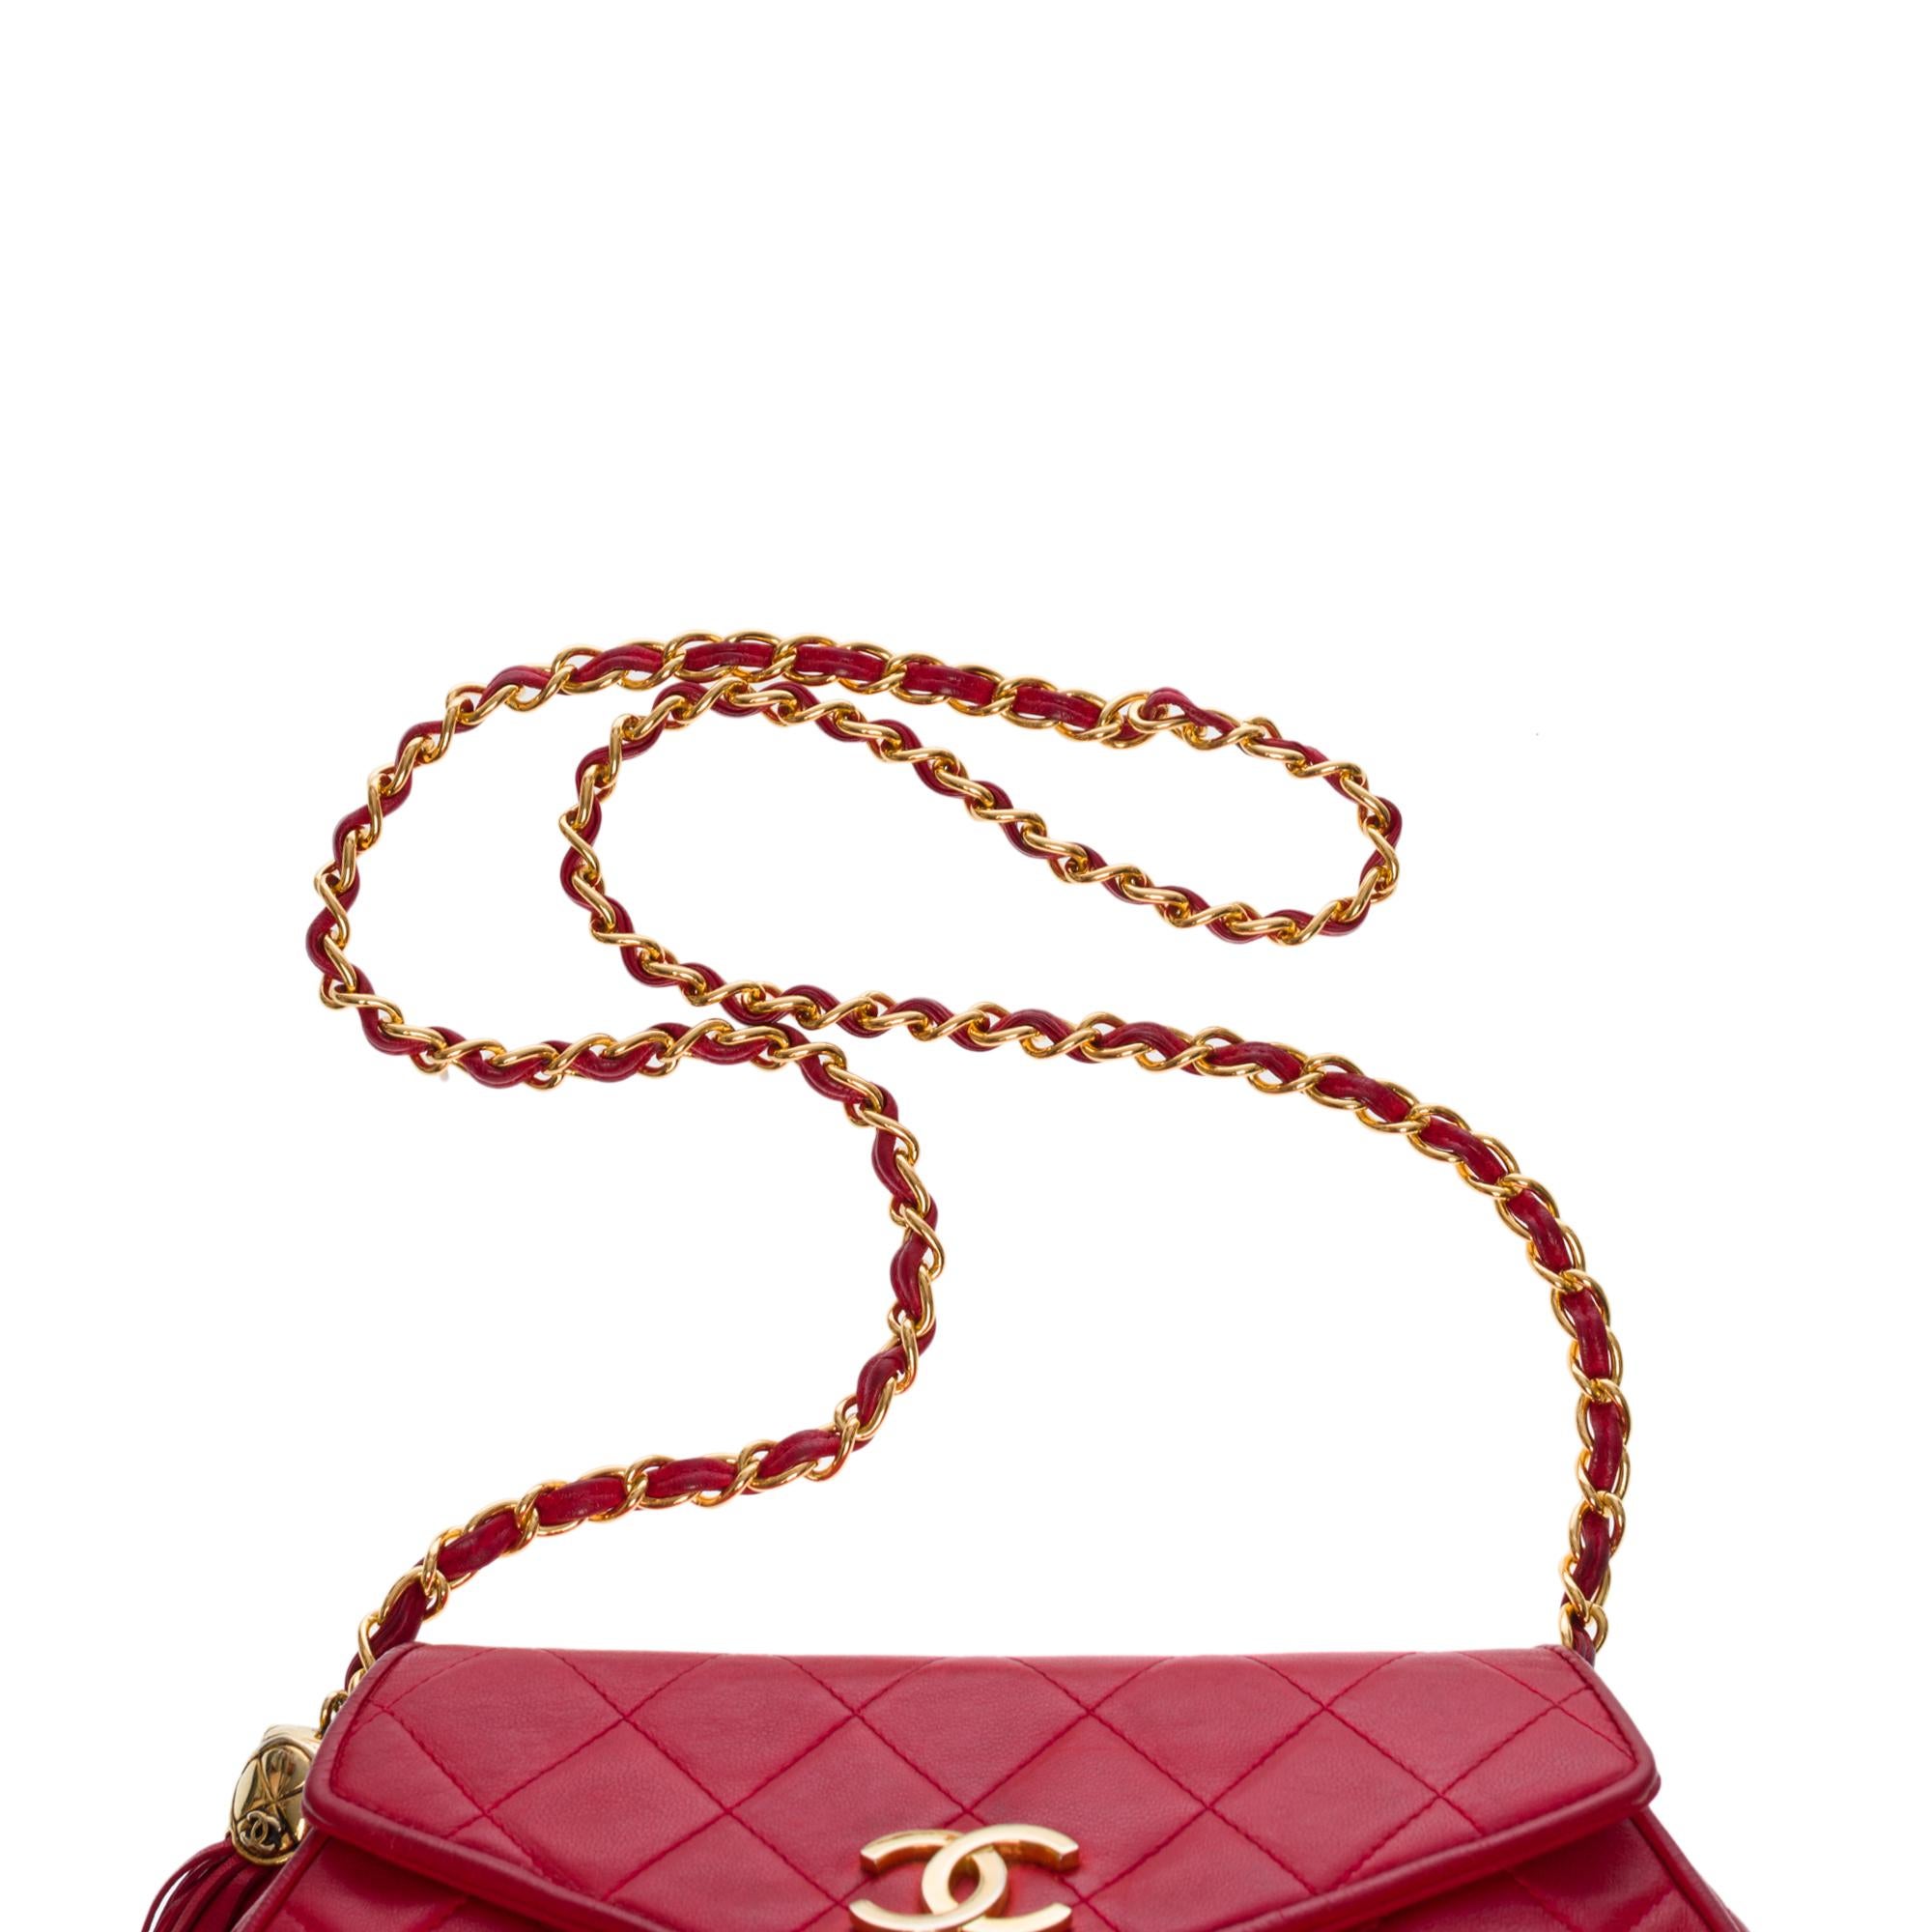 Rare Chanel Classic Flap shoulder bag in Red quilted lambskin, GHW 1